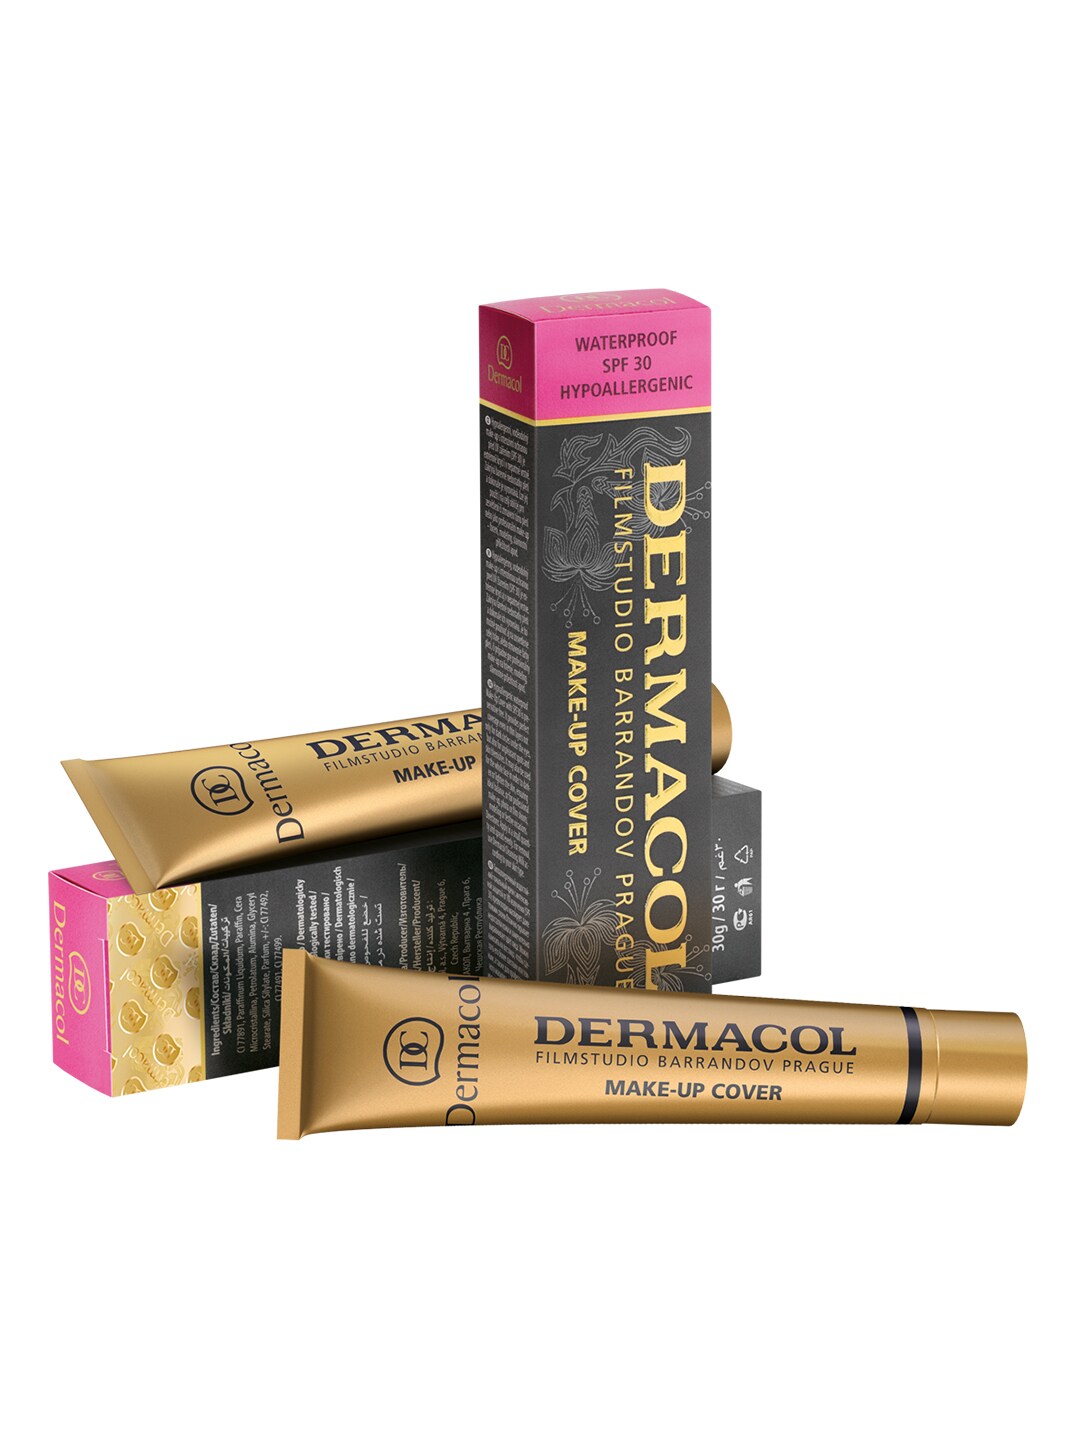 Dermacol Women Nude Make Up Cover Foundation SPF 30 Price in India